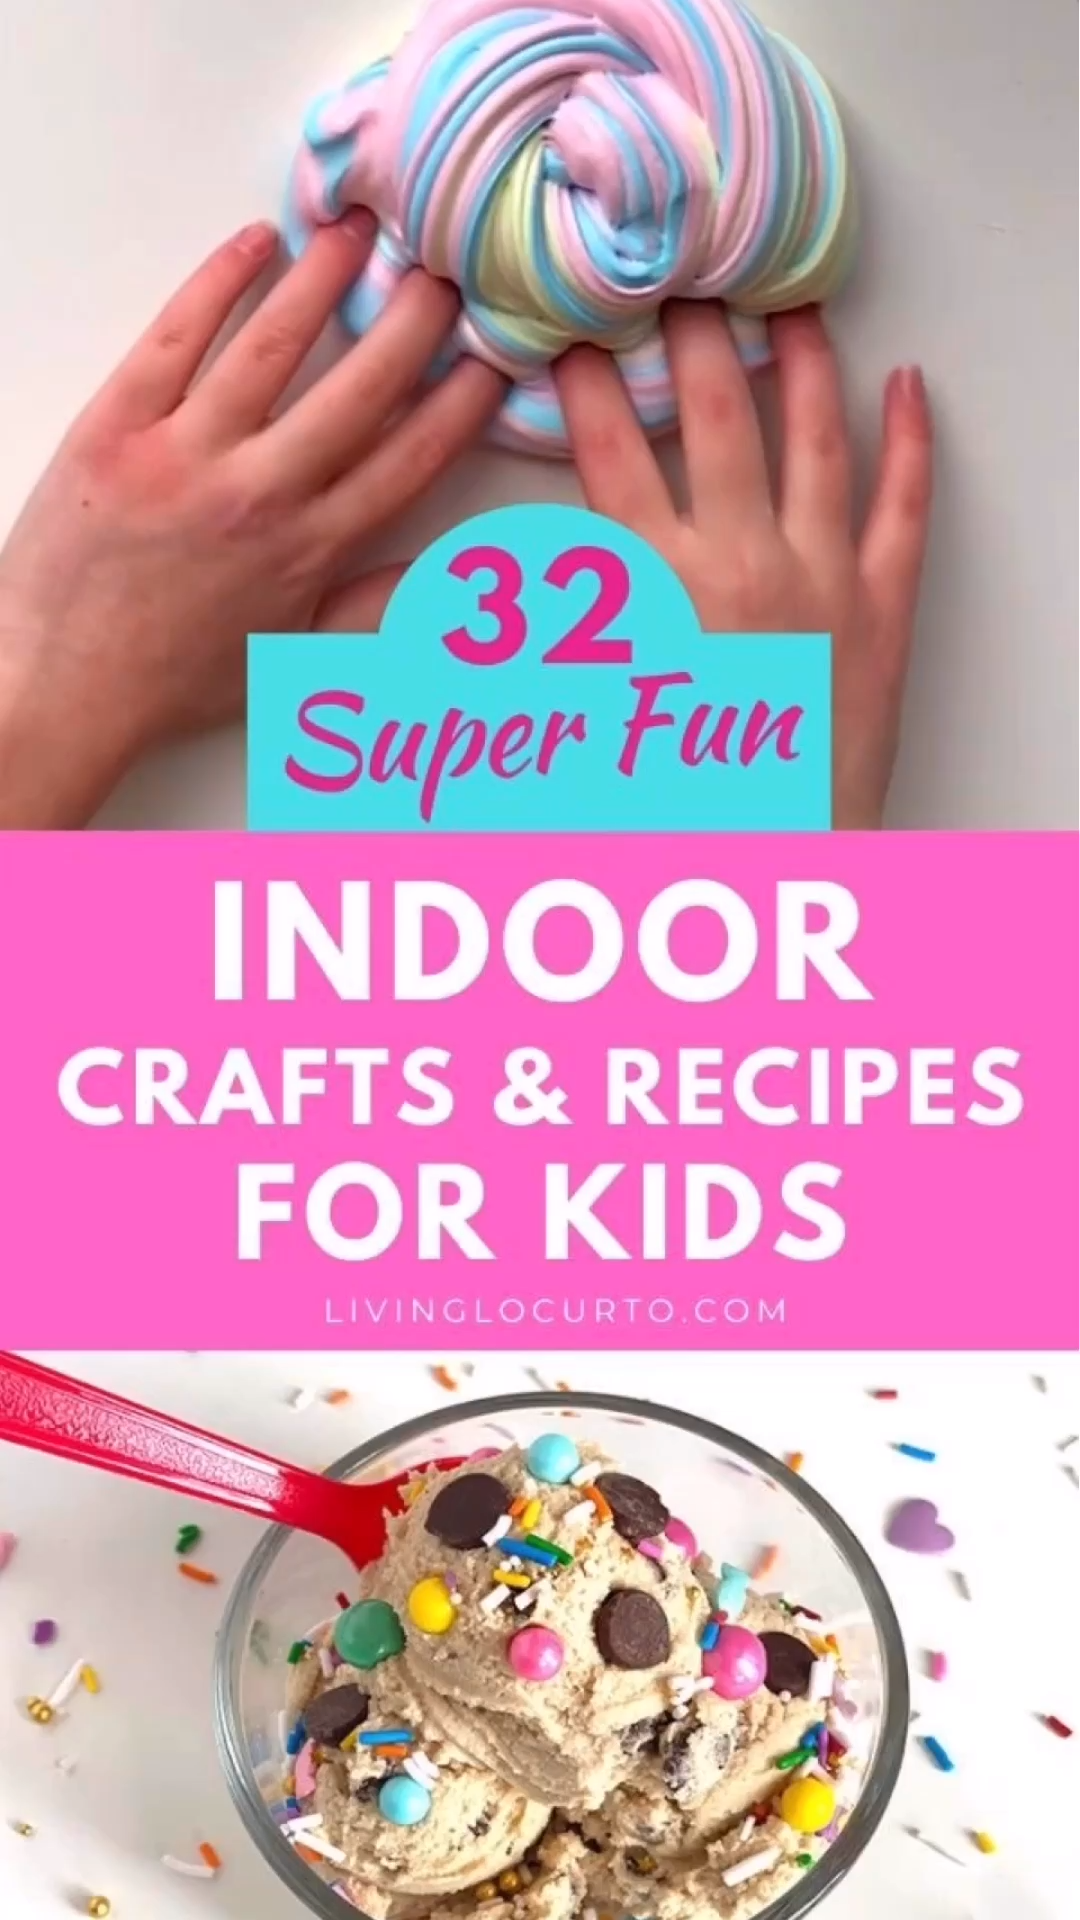 Indoor Crafts For Kids -   diy To Do When Bored crafts